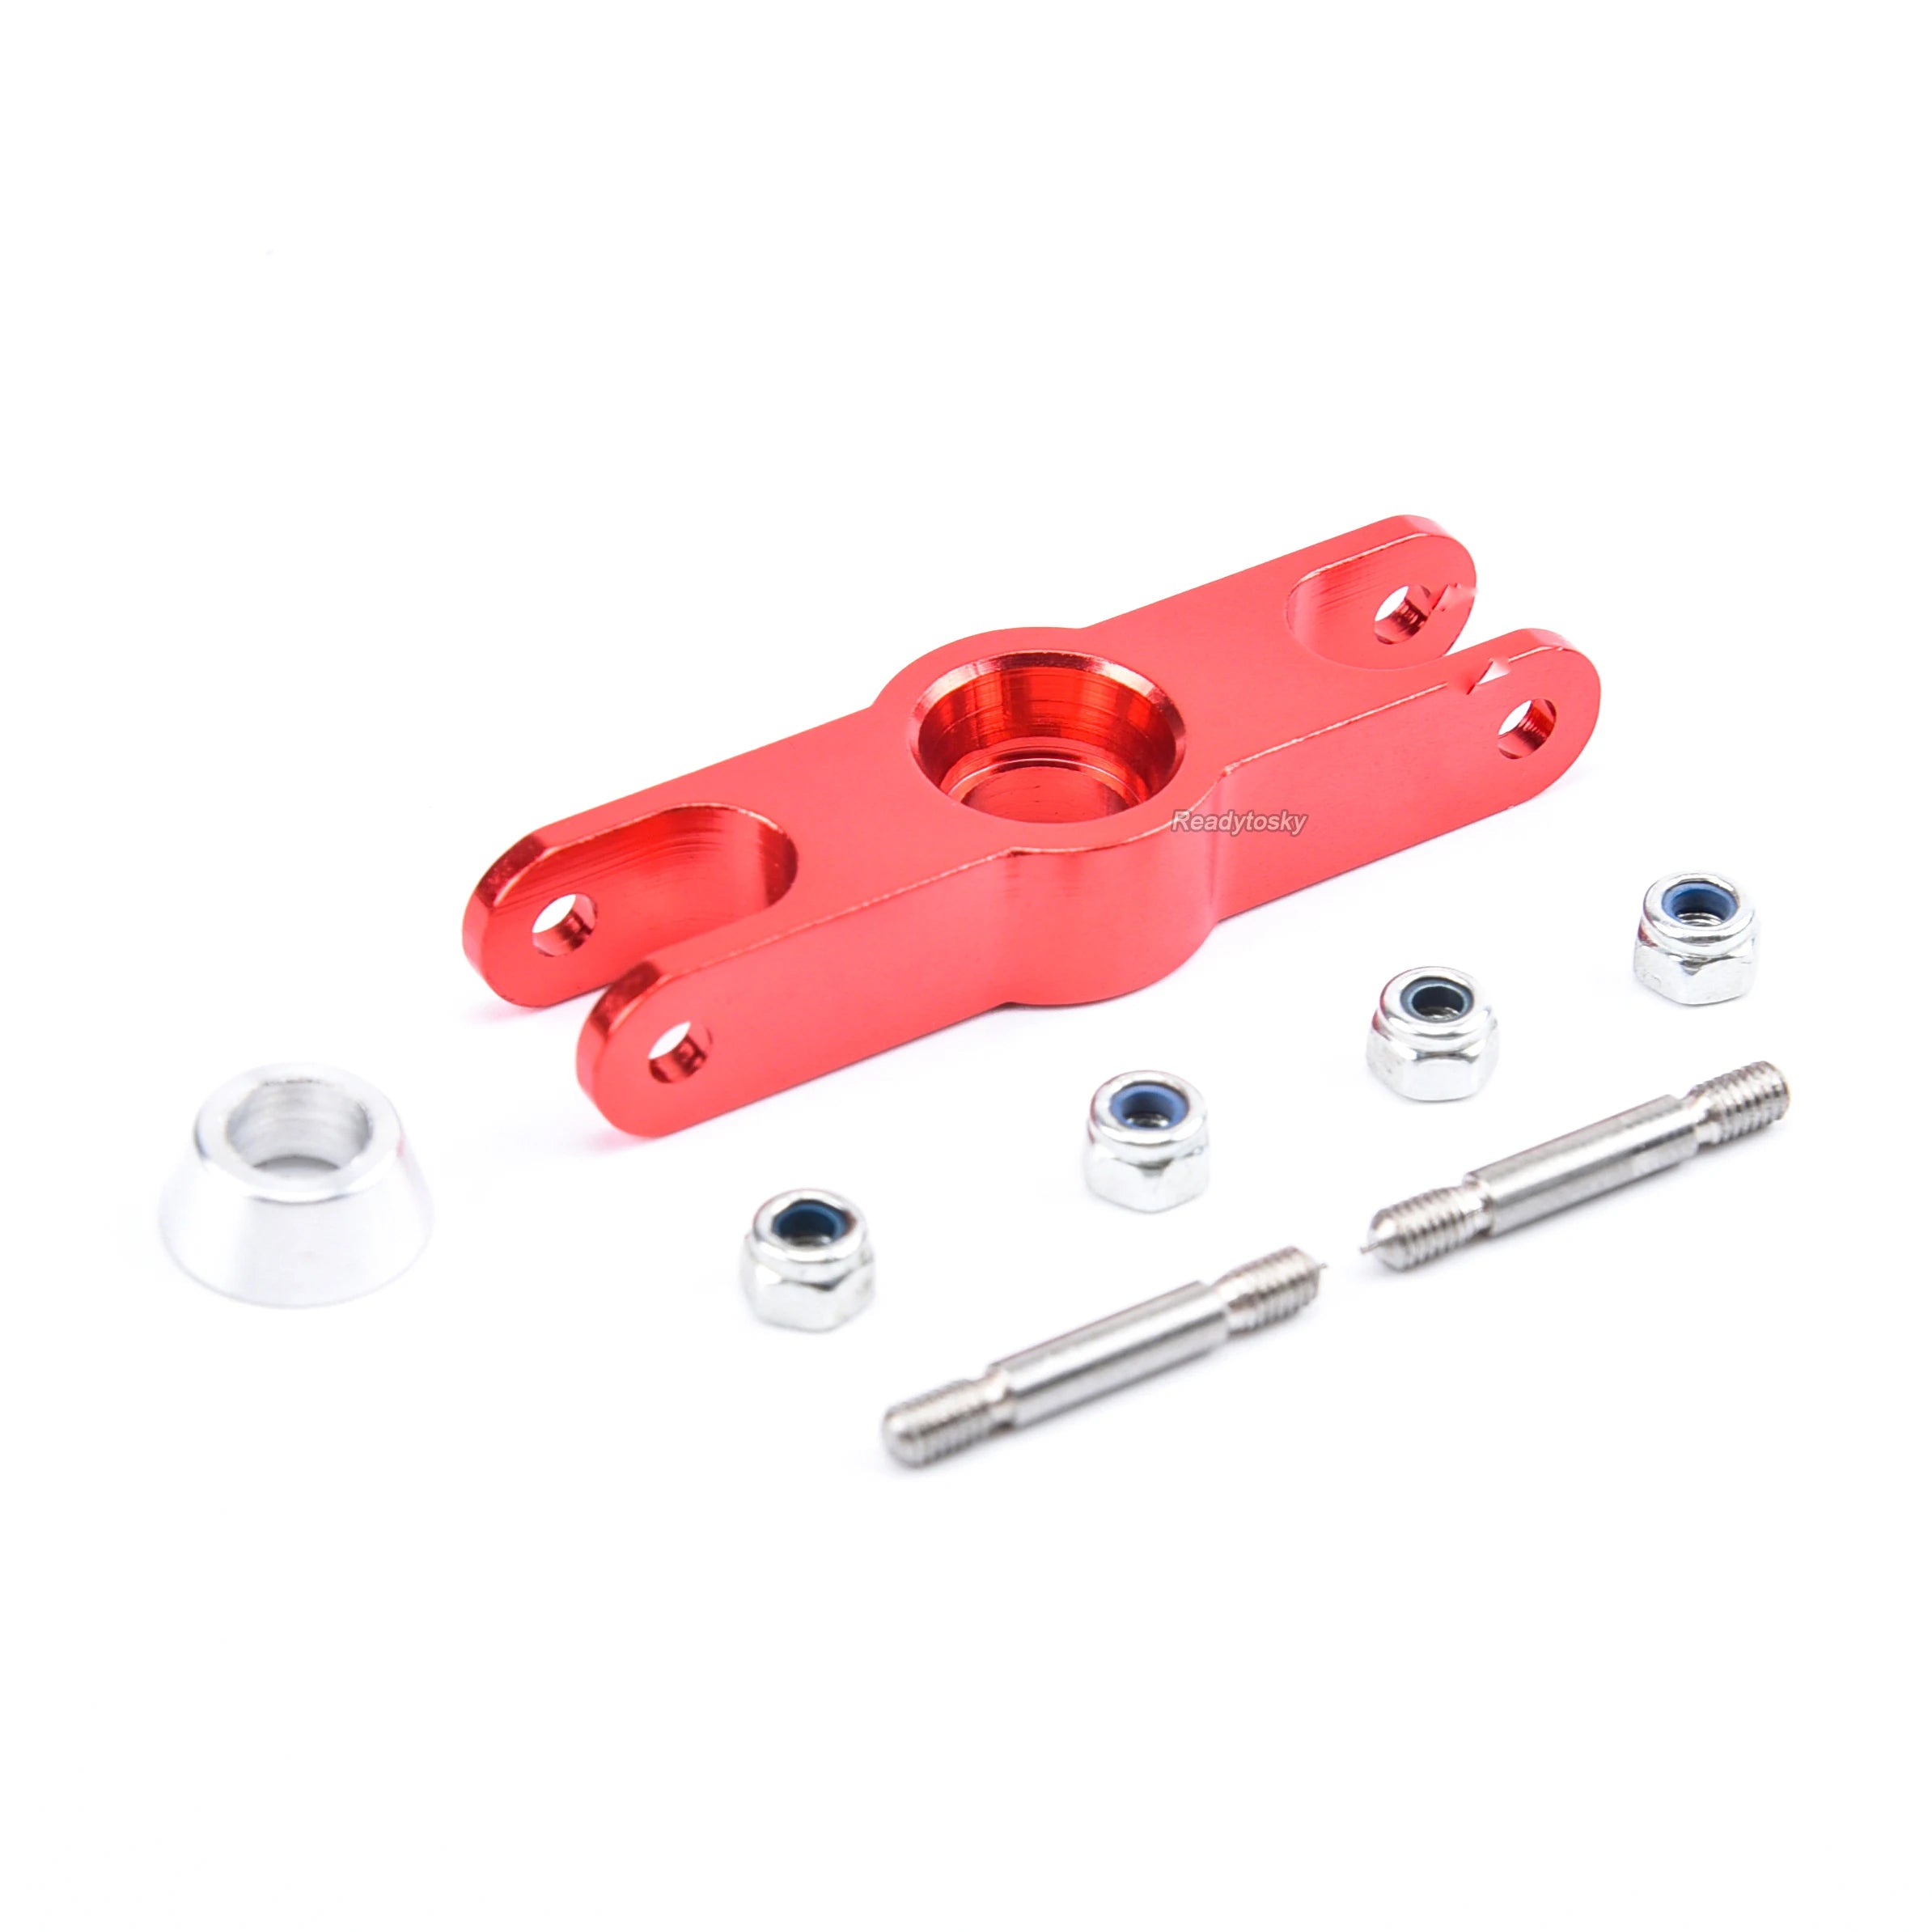 Propeller Clip, Props Adapter Thread Blade Shaft for RC Airplane Racing Drone Fixed